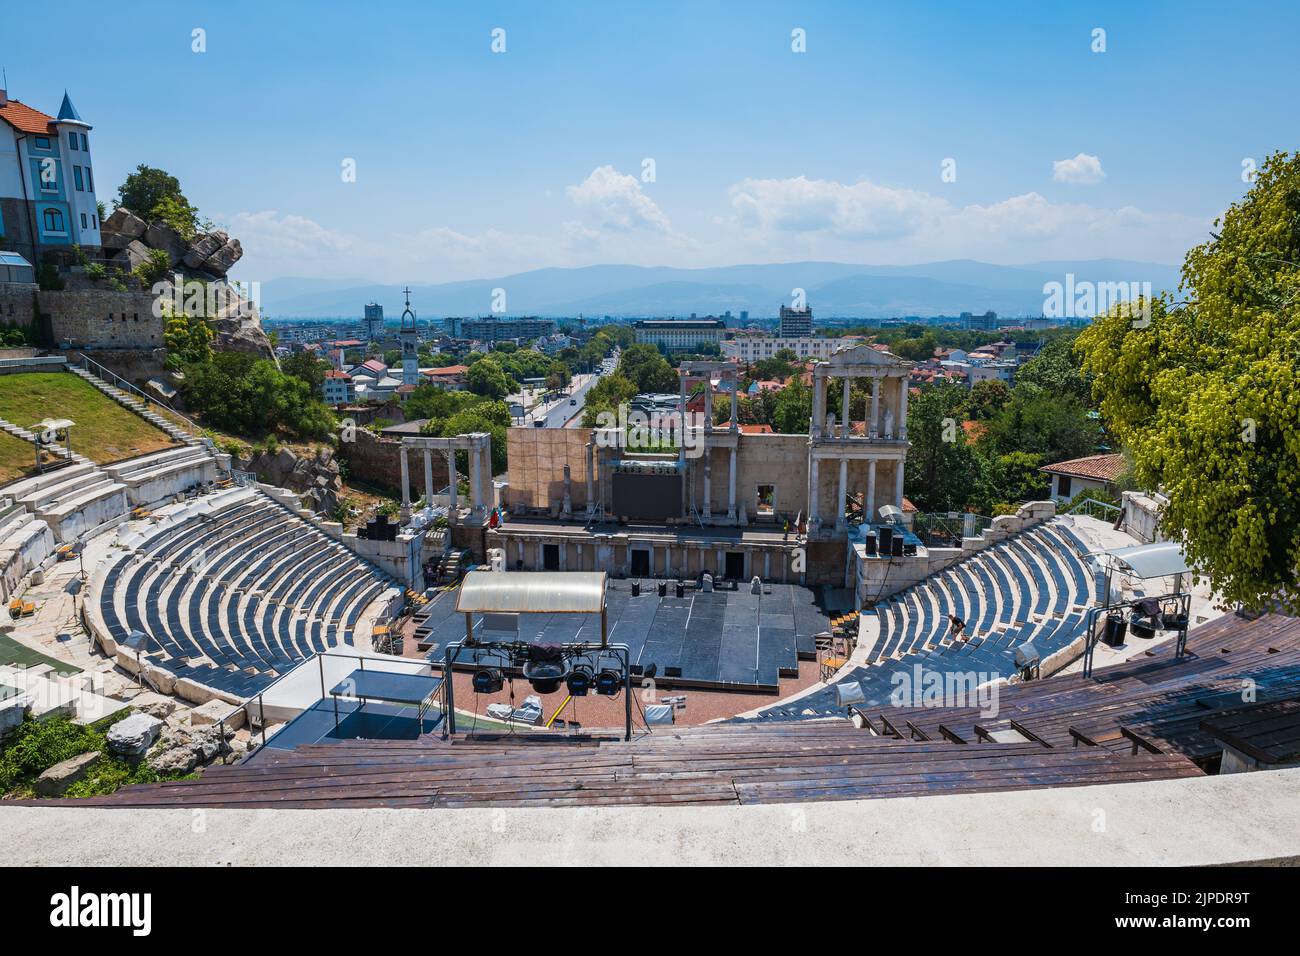 Plovdiv, Bulgaria - July 2022: Ancient Roman theatre in Plovdiv, Bulgaria, a famous landmark popular for tourists Stock Photo